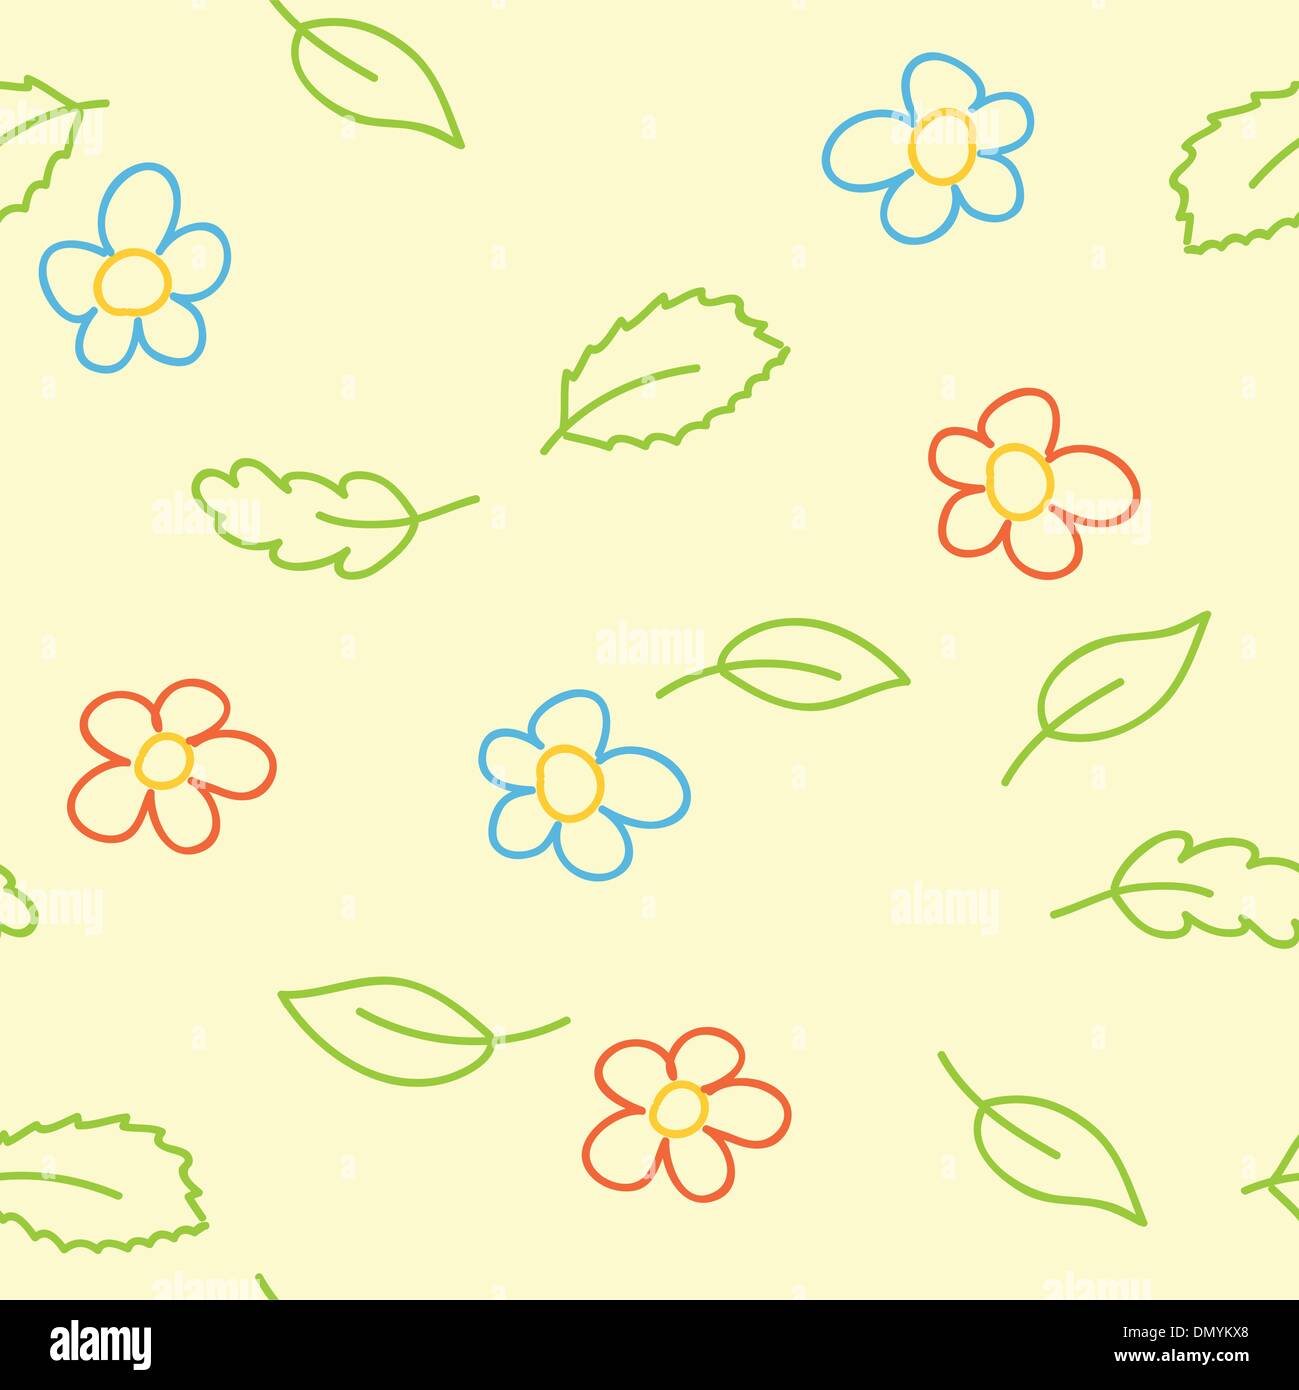 seamless pattern of childish  picture  - eps Stock Vector